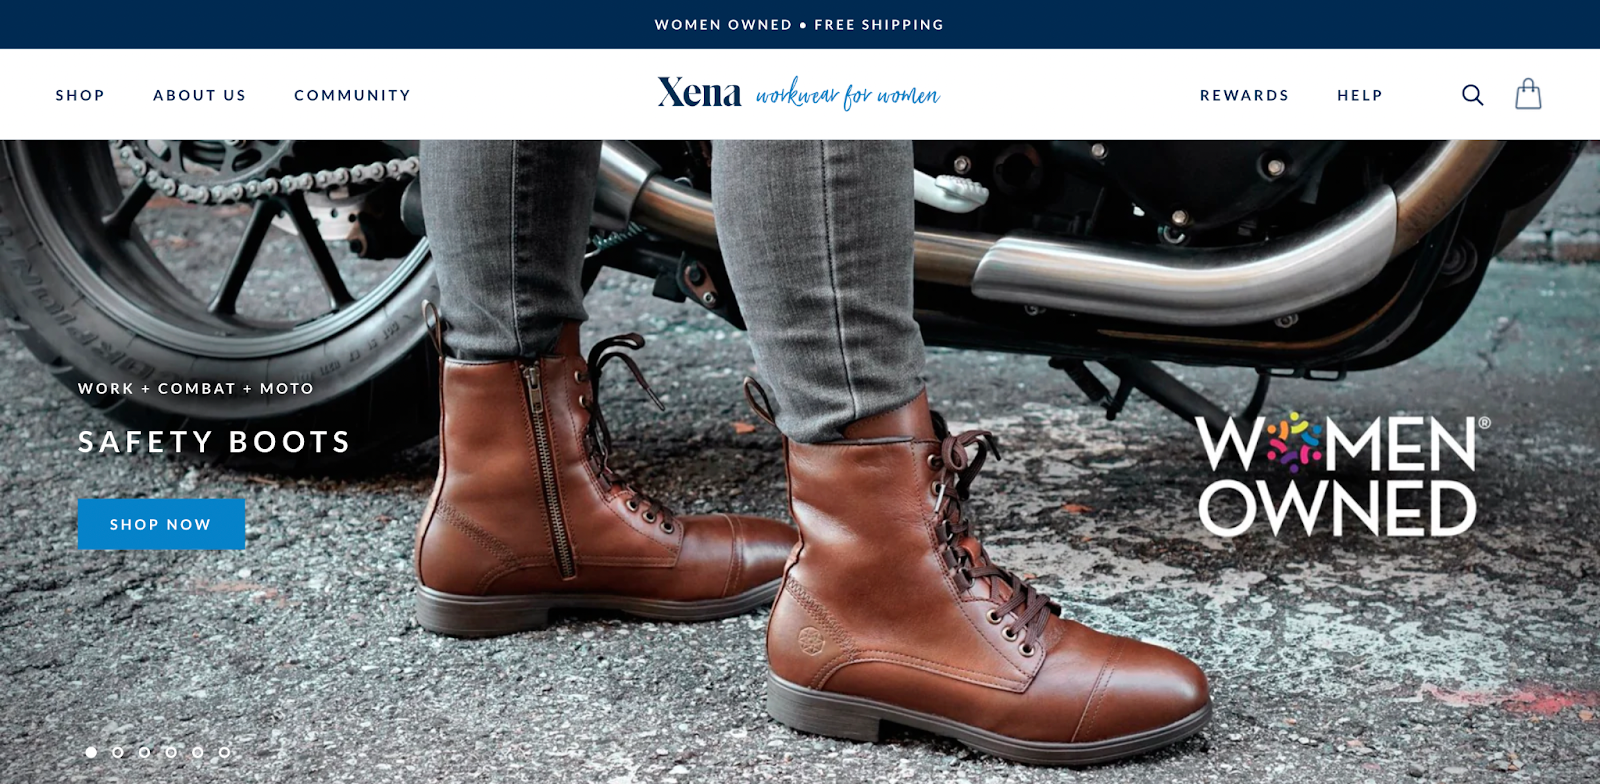 Branding checklist–A screenshot from Xena Workwear for Women's homepage showing a pair of brown safety boots and a label saying "Women Owned". 